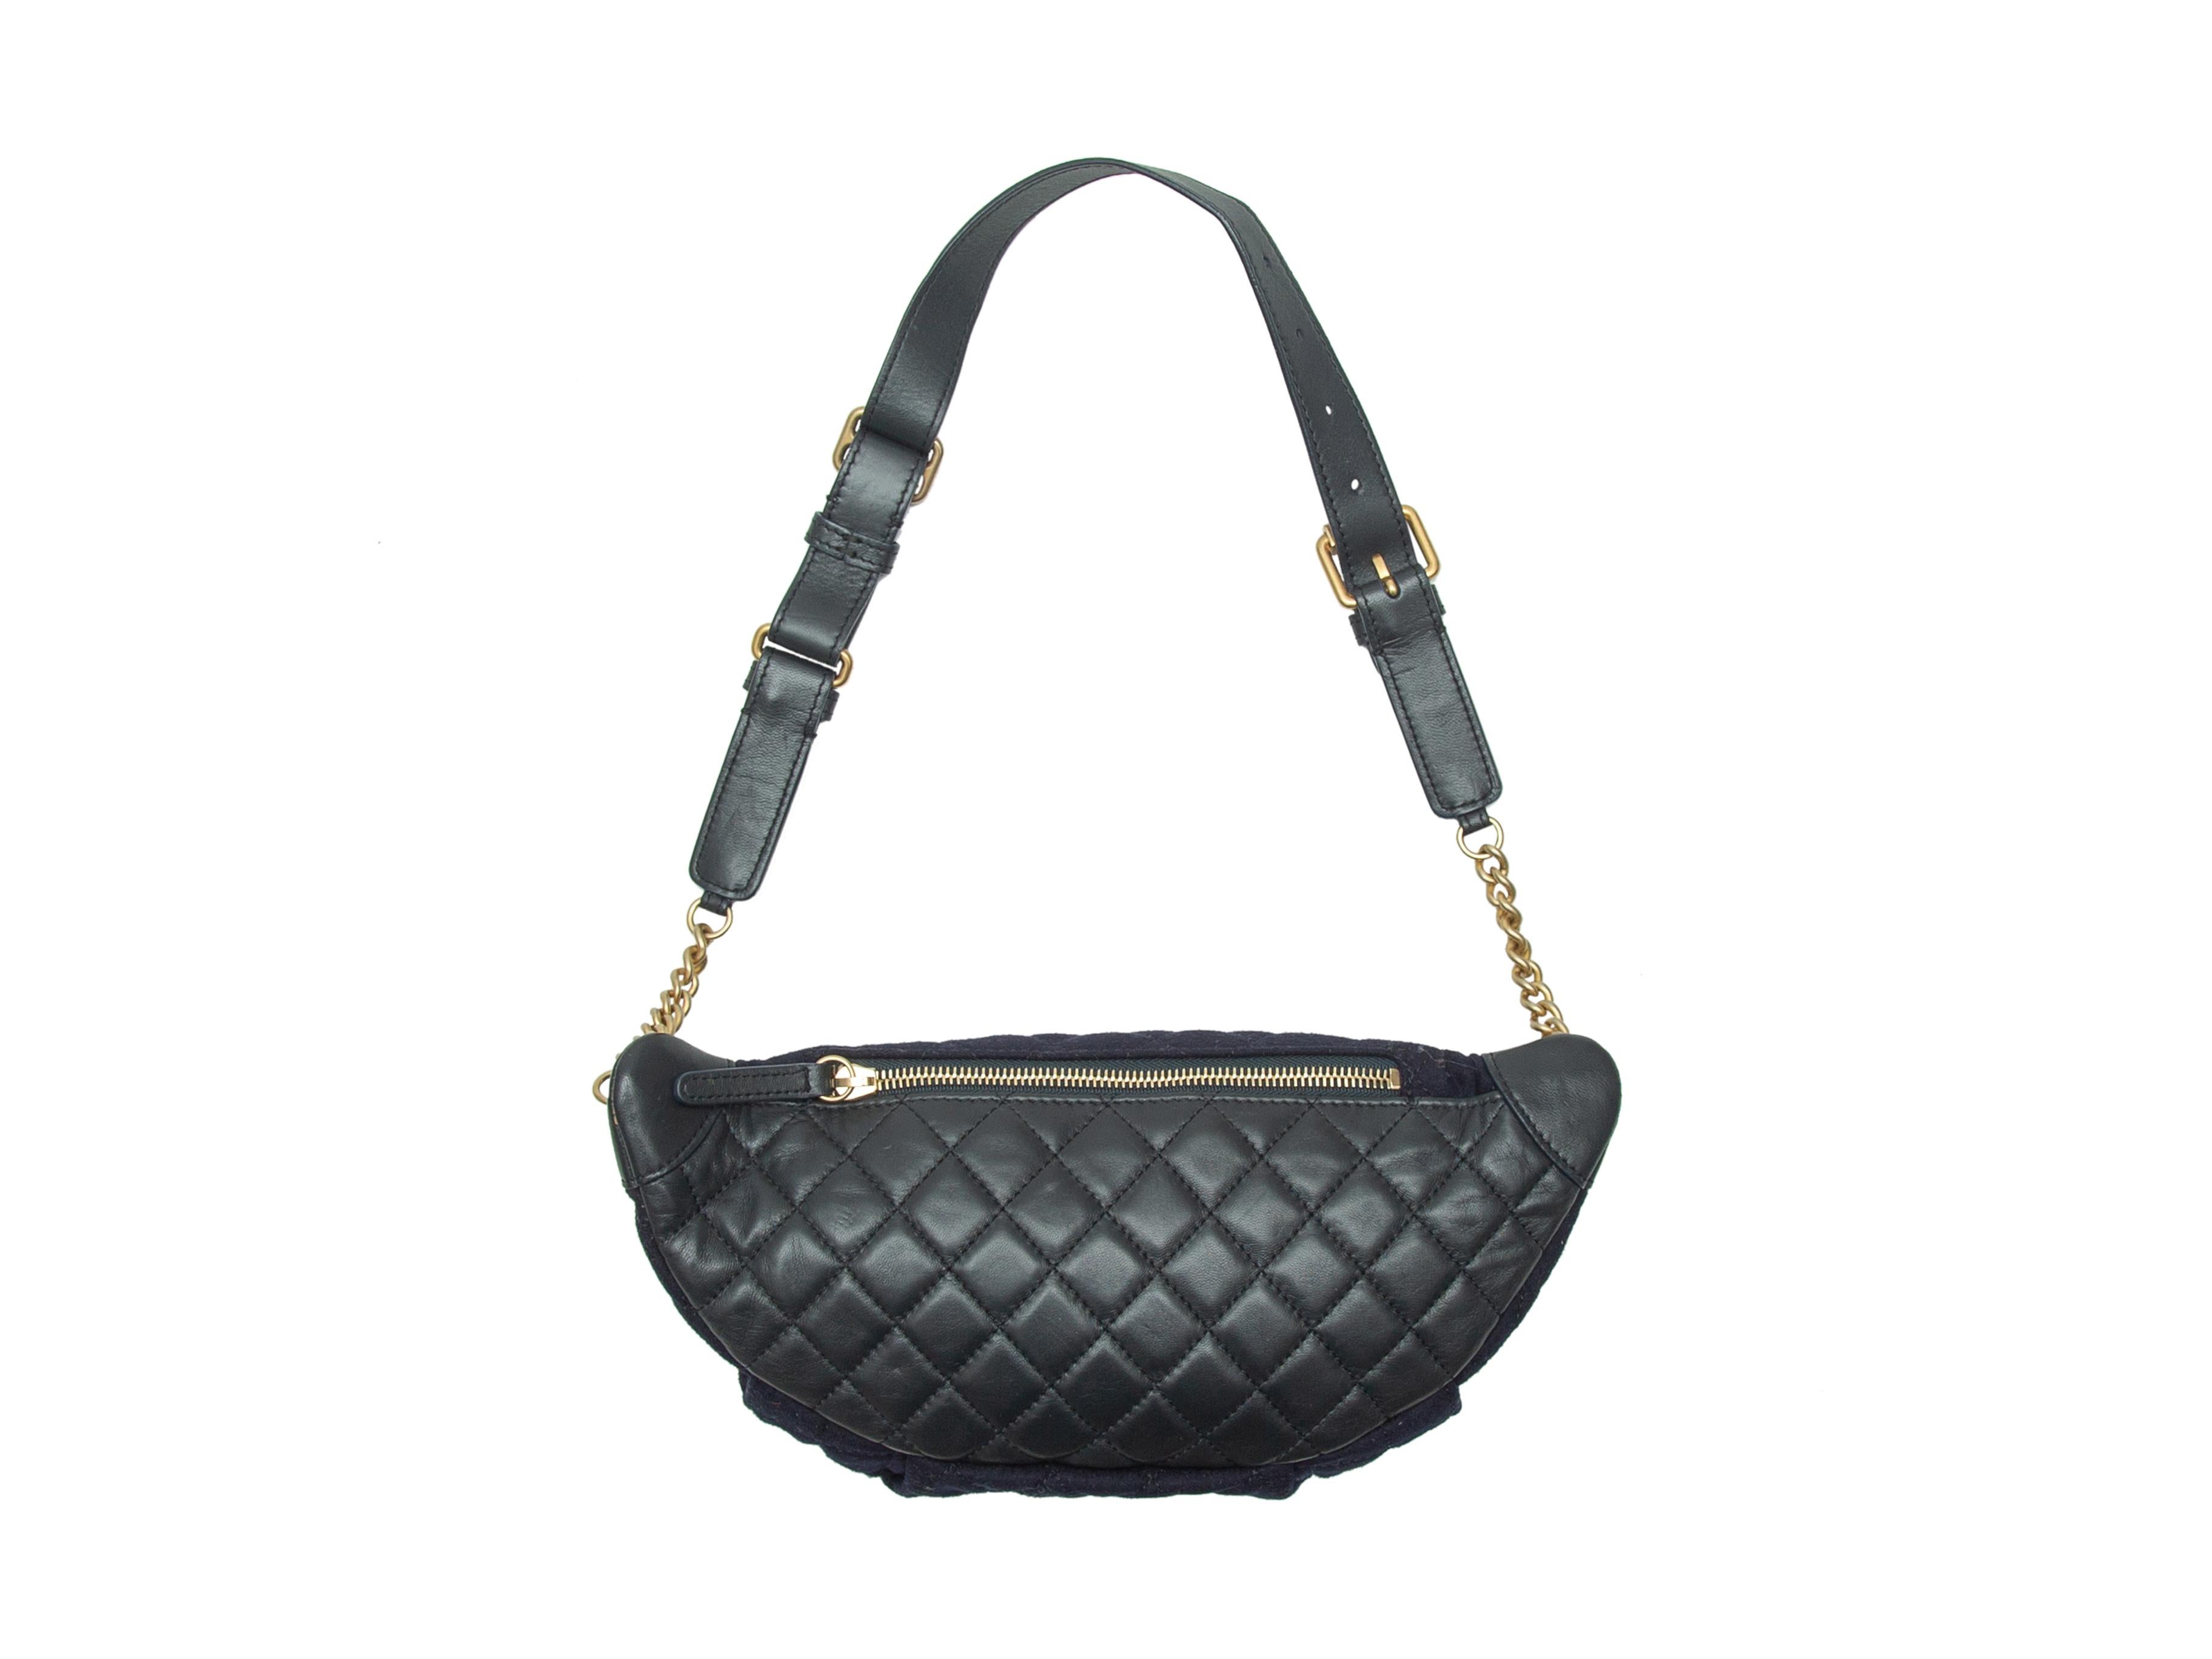 Product details: Navy quilted felt waist bag by Chanel. Gold-tone hardware. Adjustable waist strap. Maritime-themed pin accents at front. CC-accented zip closure at top. 13.5